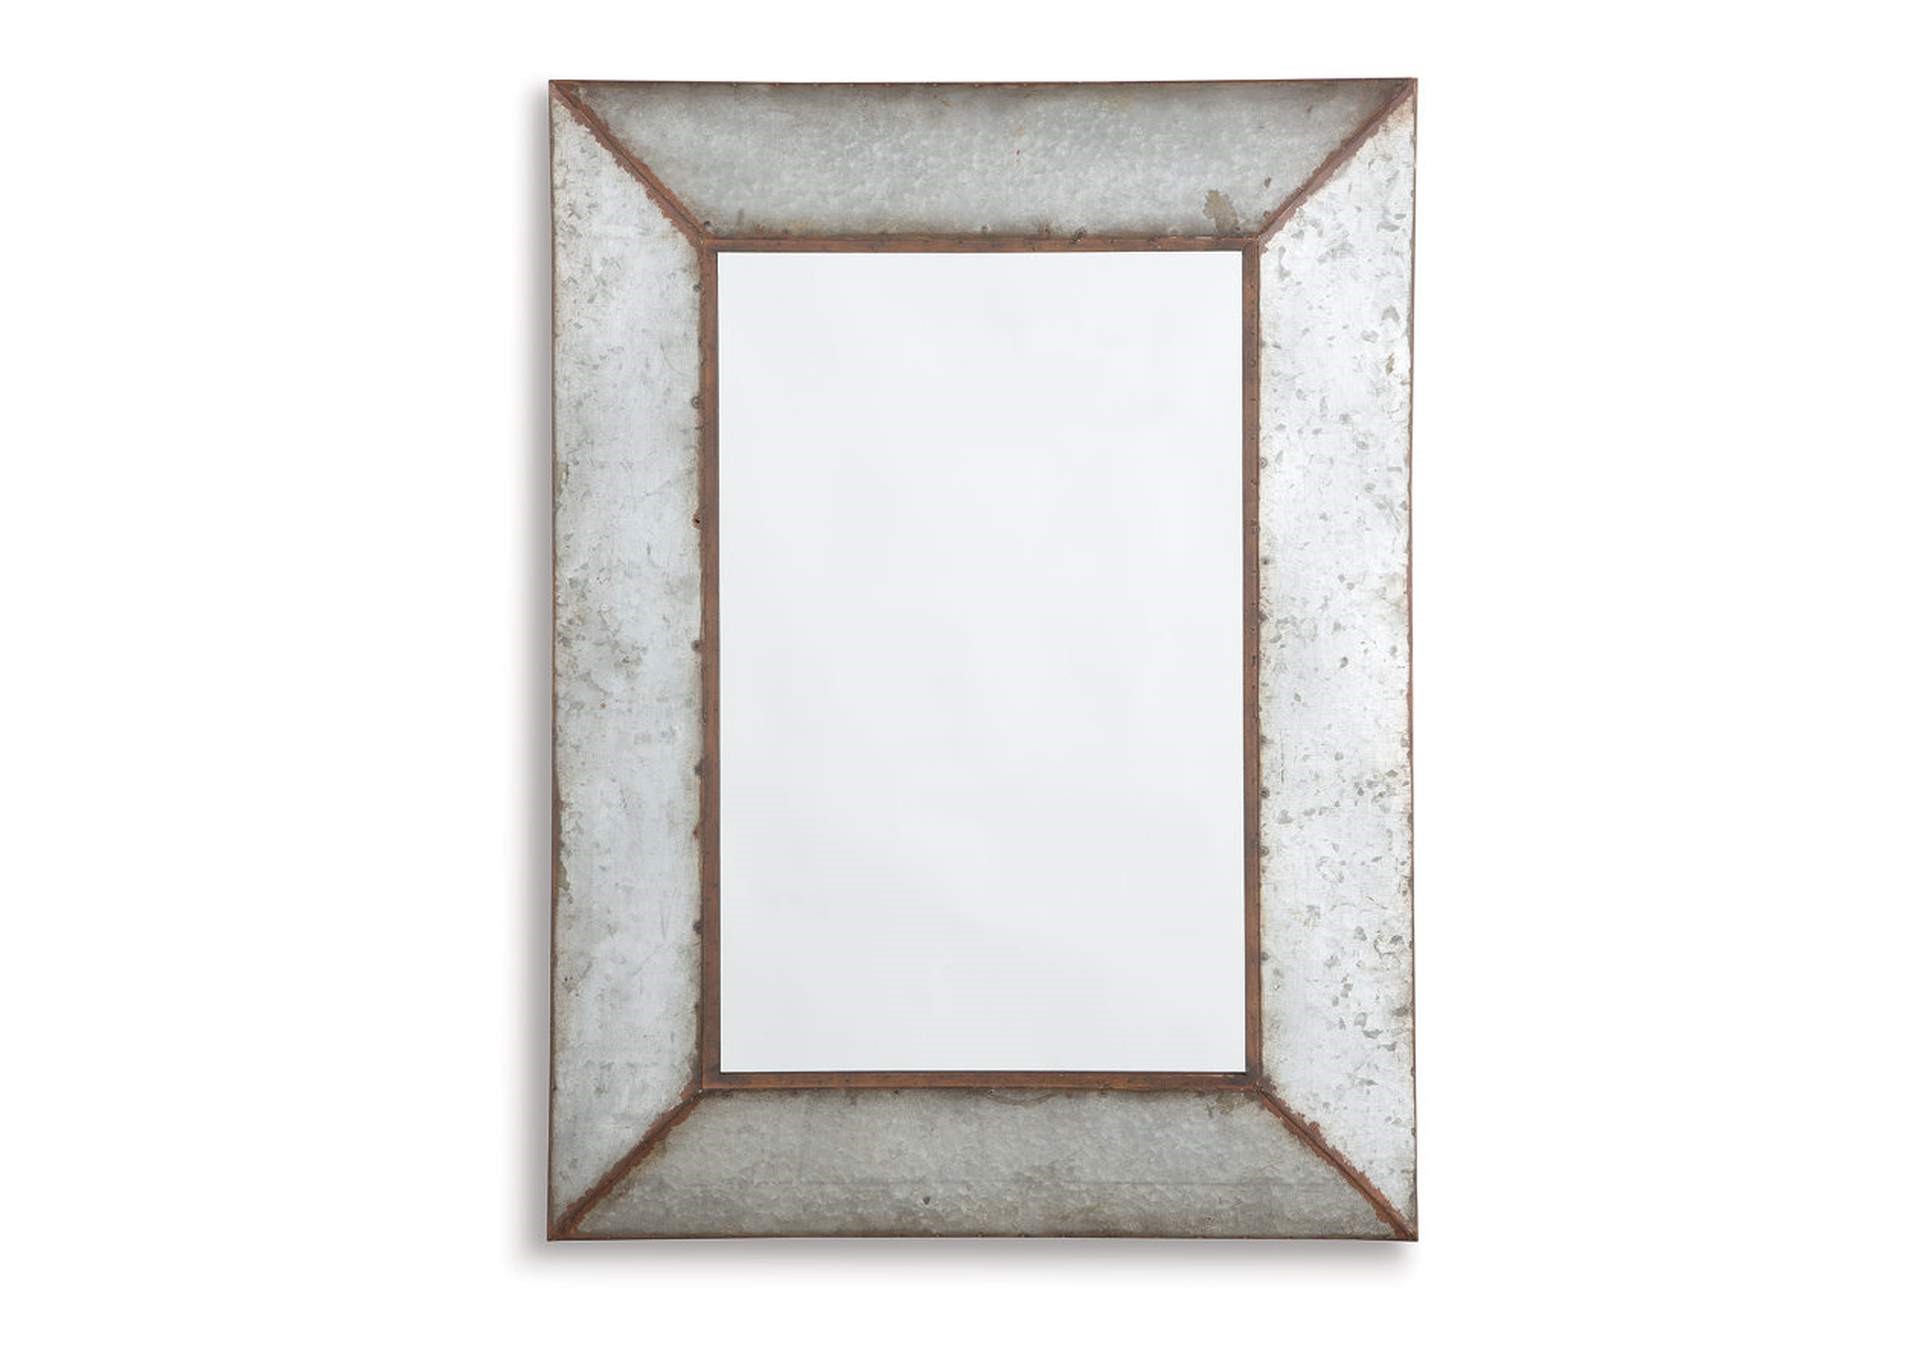 Selecting the Ideal Rustic Rectangular Mirror for Your Space